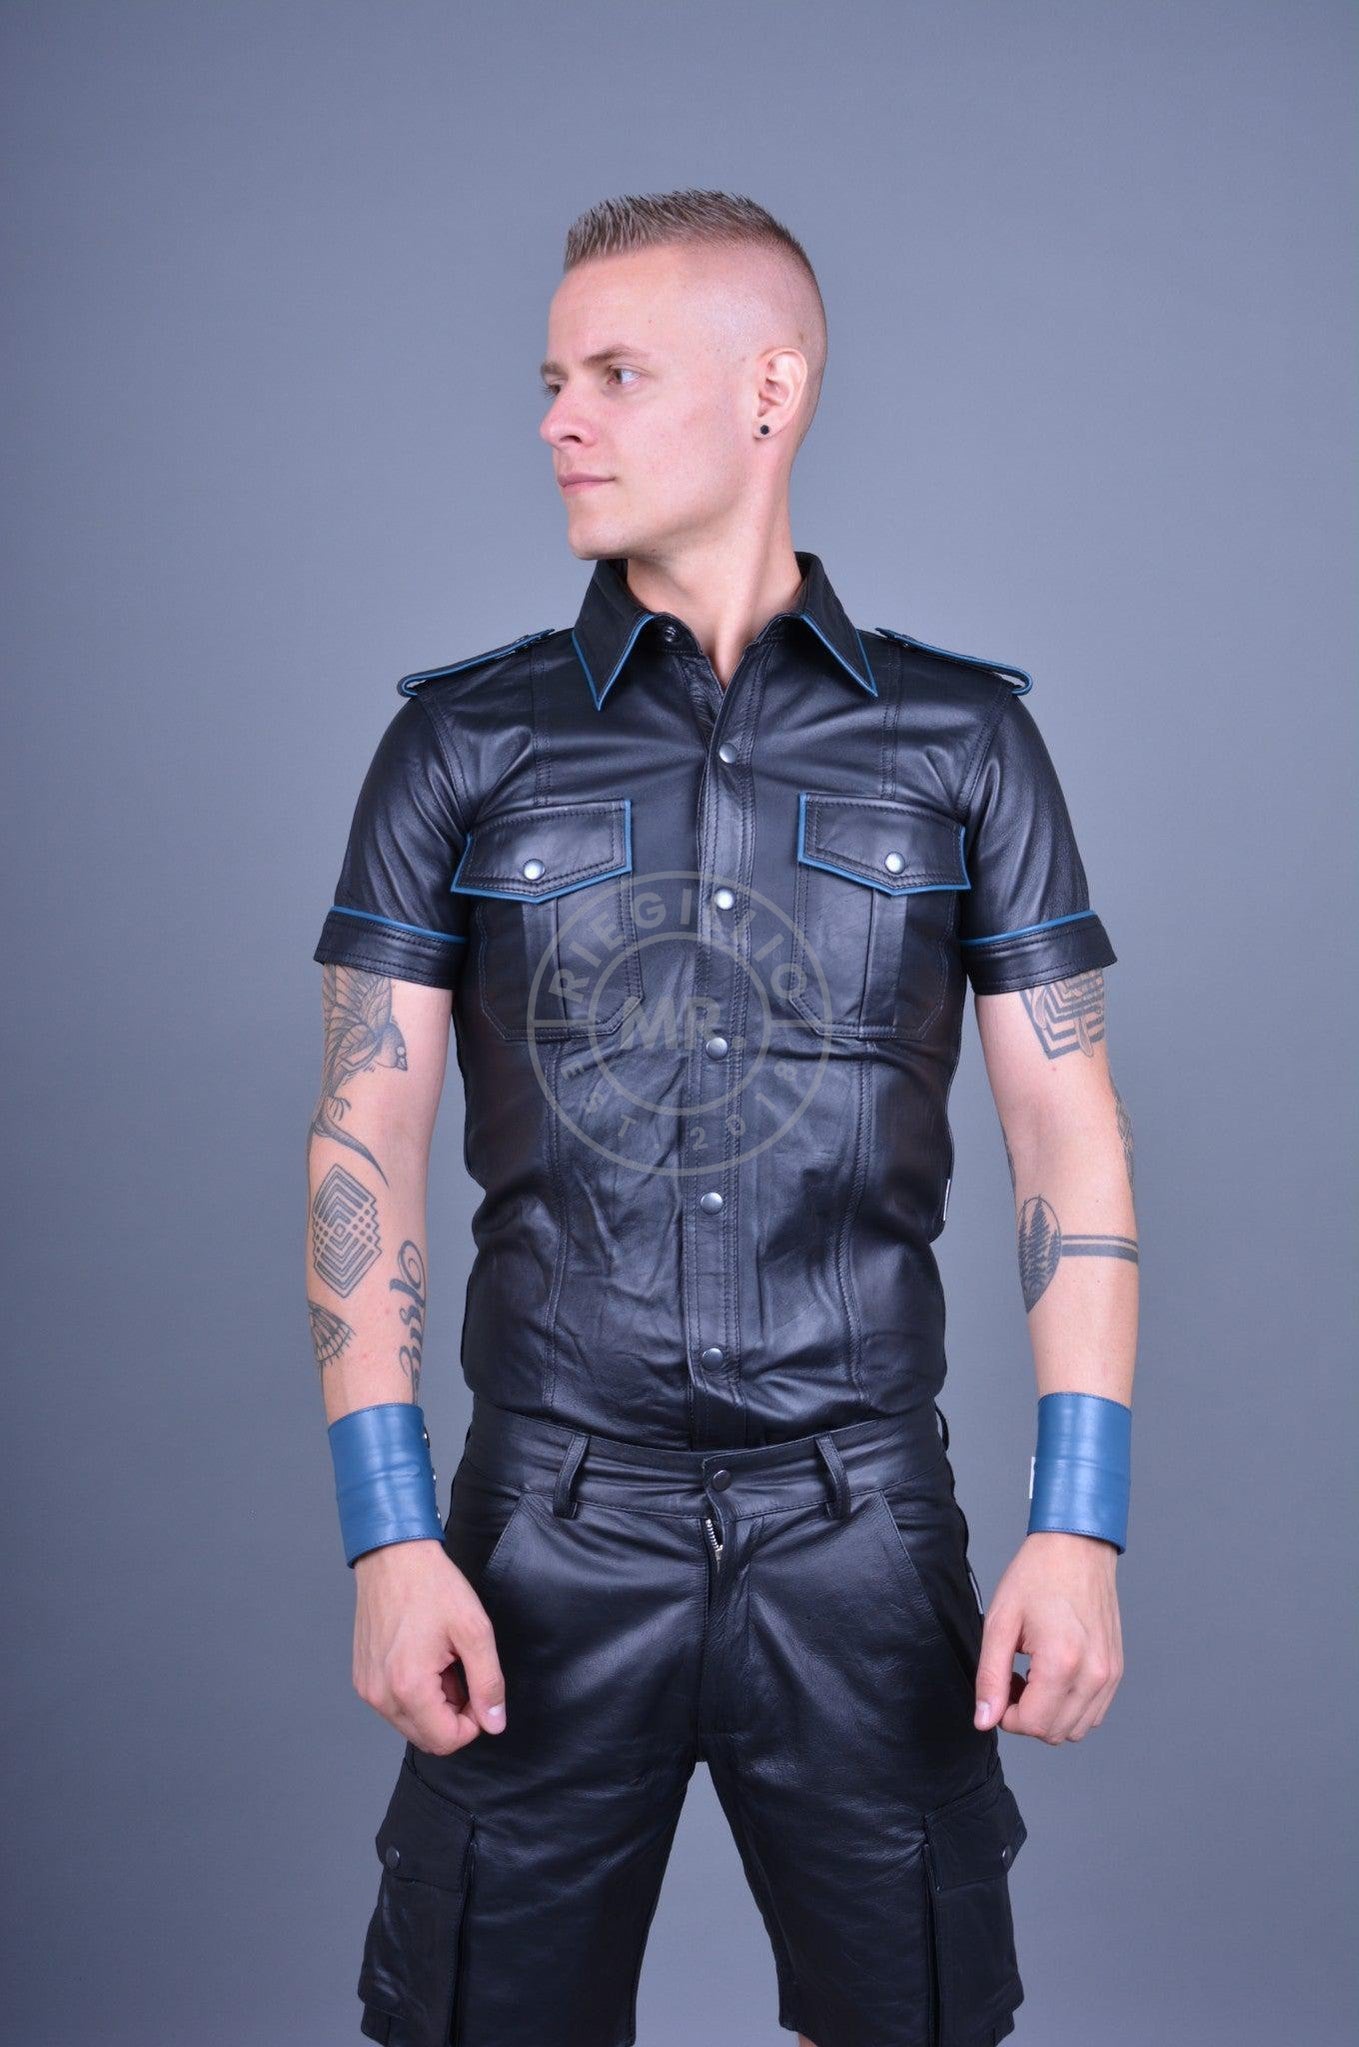 Black Leather Shirt - JEANS BLUE Piping by MR. Riegillio